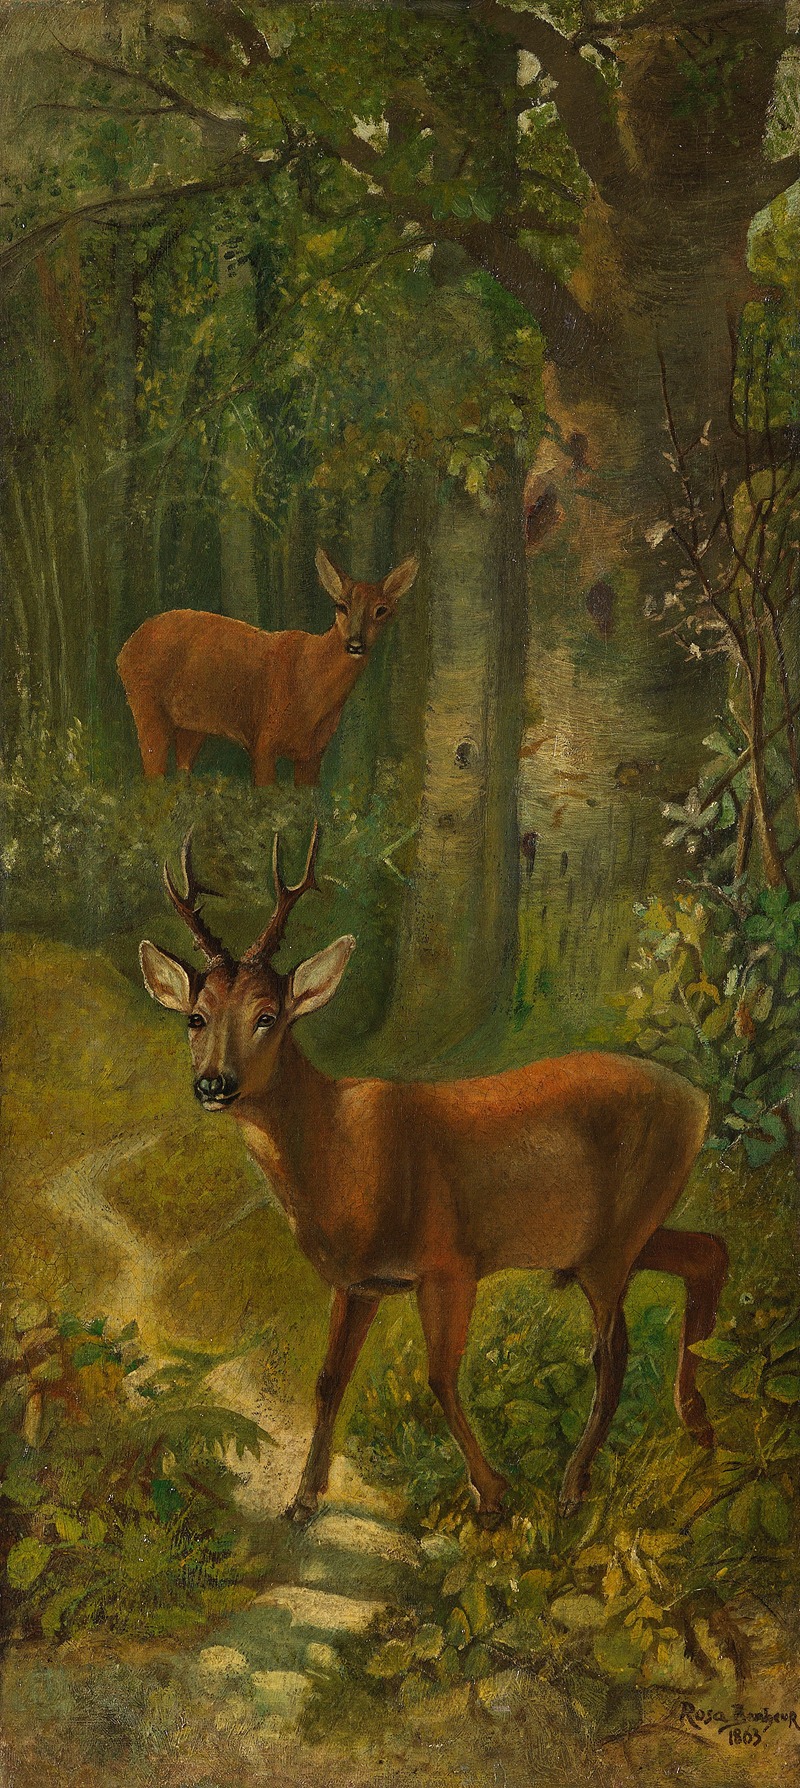 Rosa Bonheur - Deer at the edge of the forest